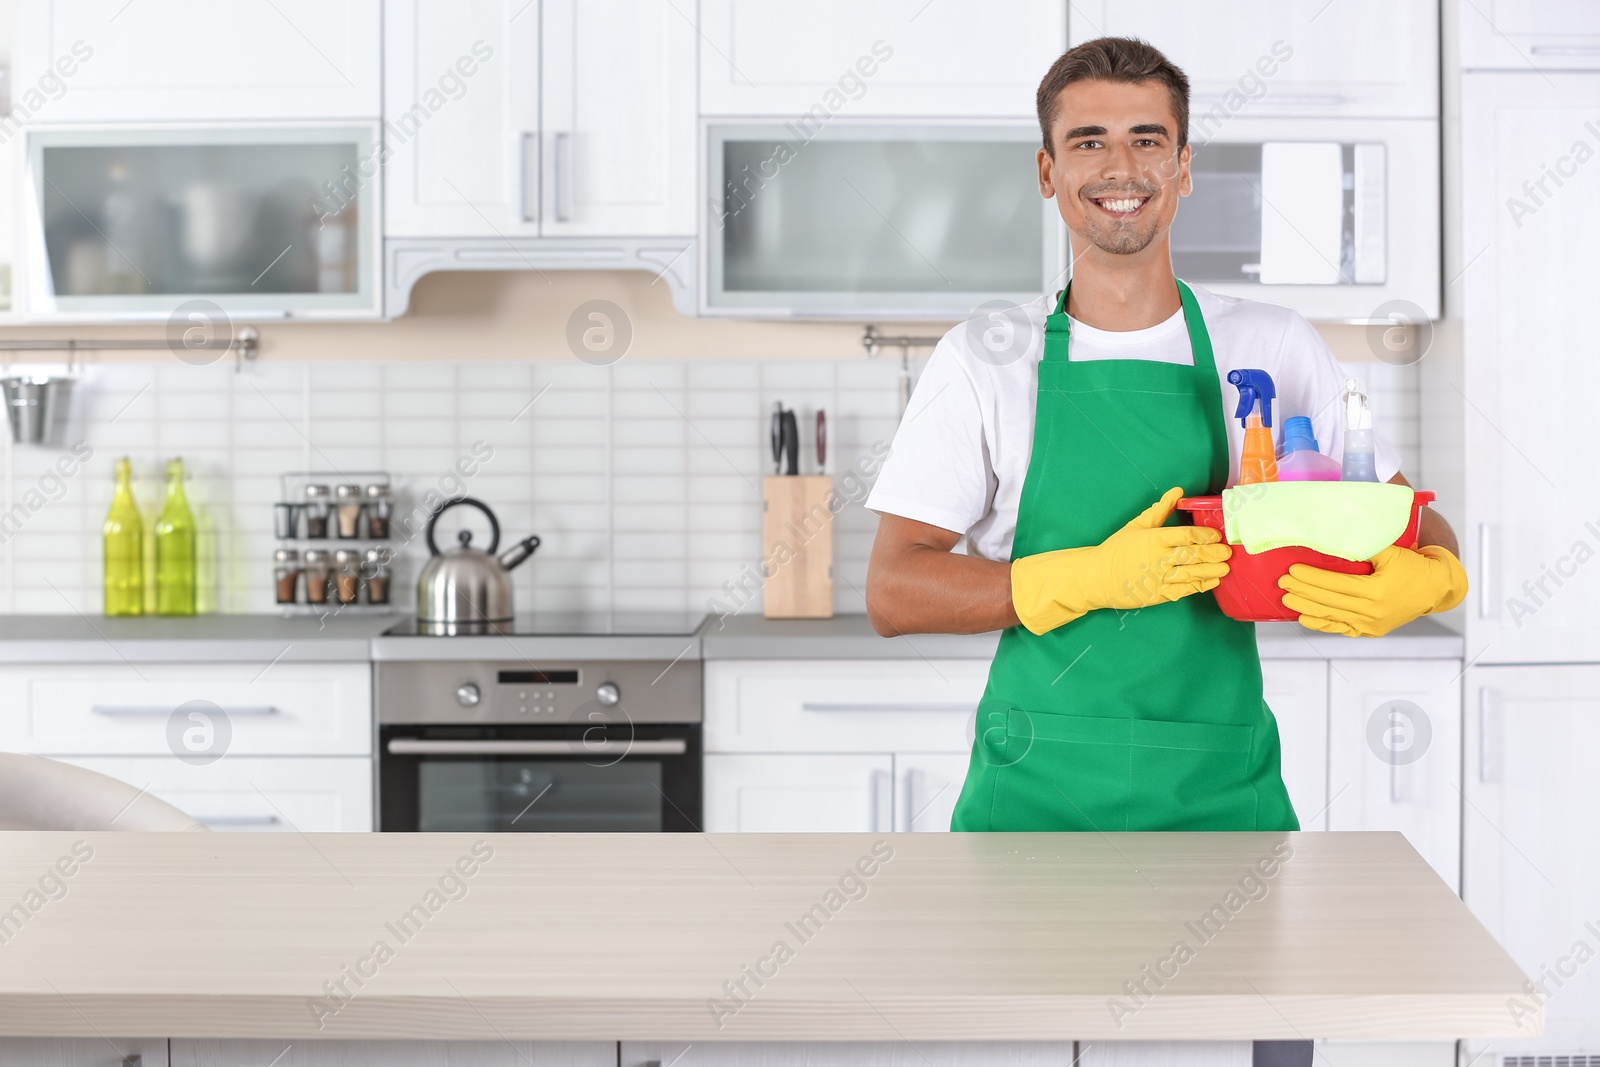 Photo of Man with basin and cleaning supplies in kitchen